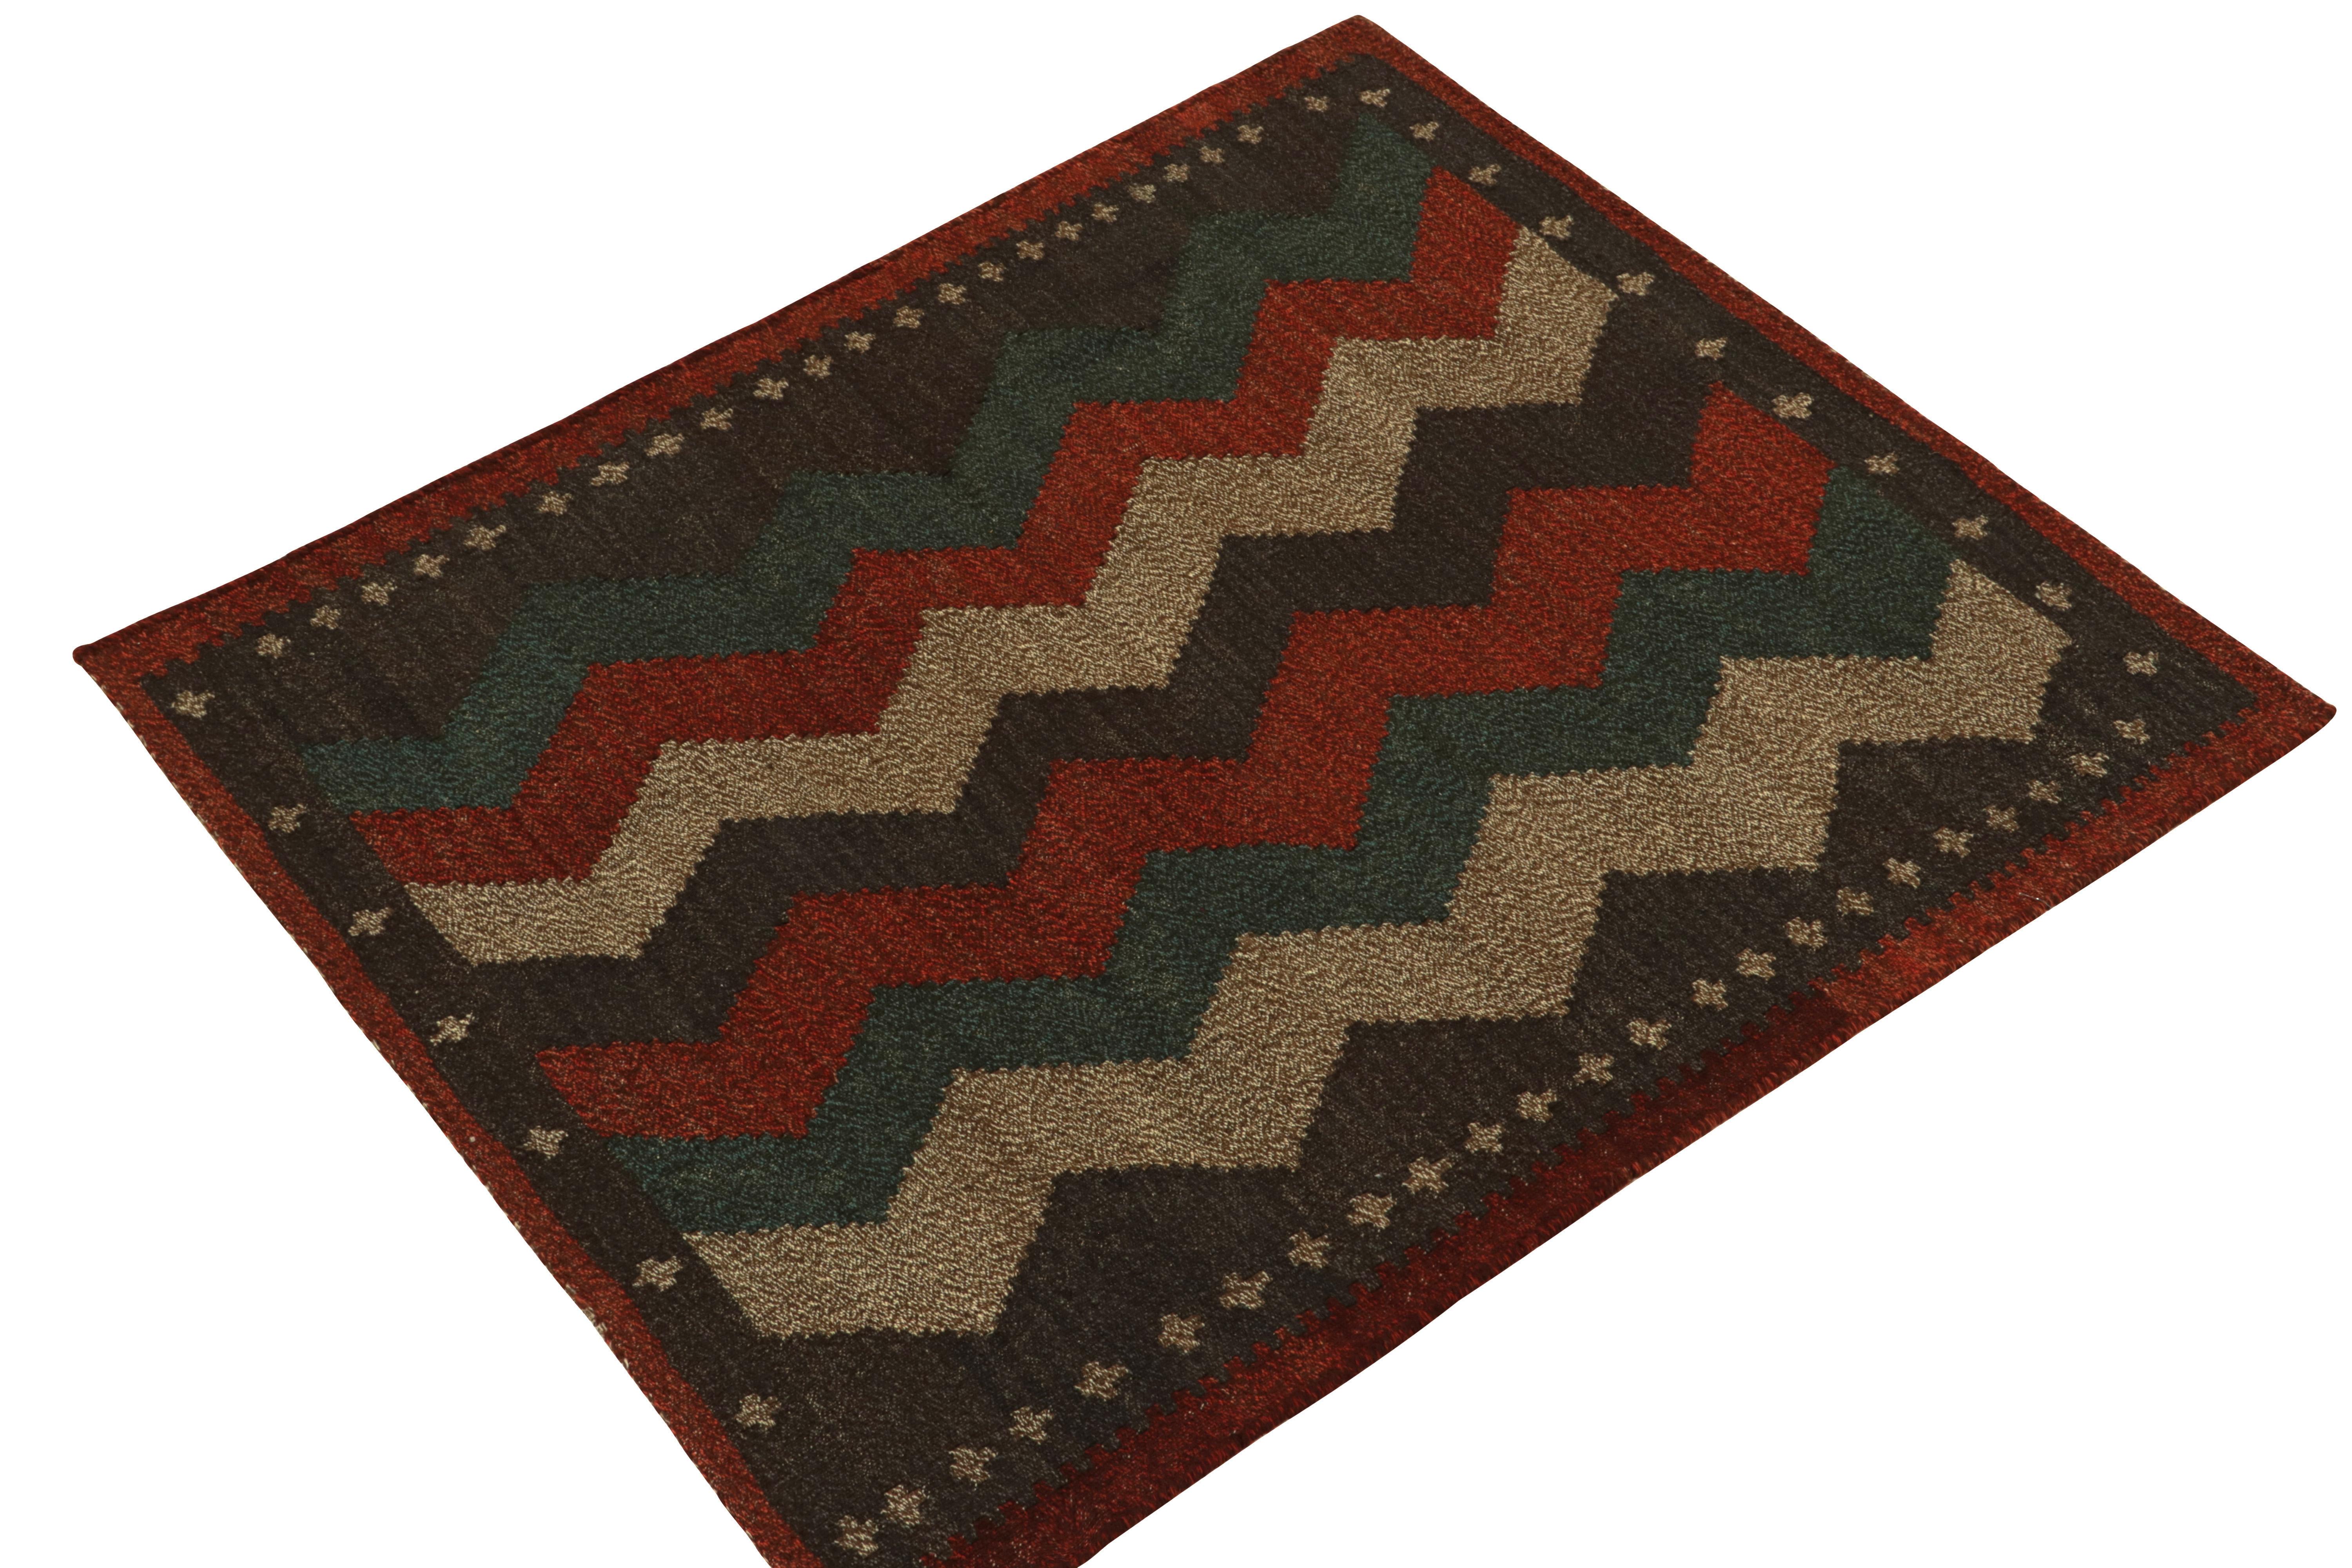 Handwoven in wool circa 1980-1990, from a rare vintage curation of small-sized Kilim rugs joining our tribal classics. A lineage called Sofreh rugs, distinguished among Persian flat weaves for durability and playful hues alike.

The 4x4 piece